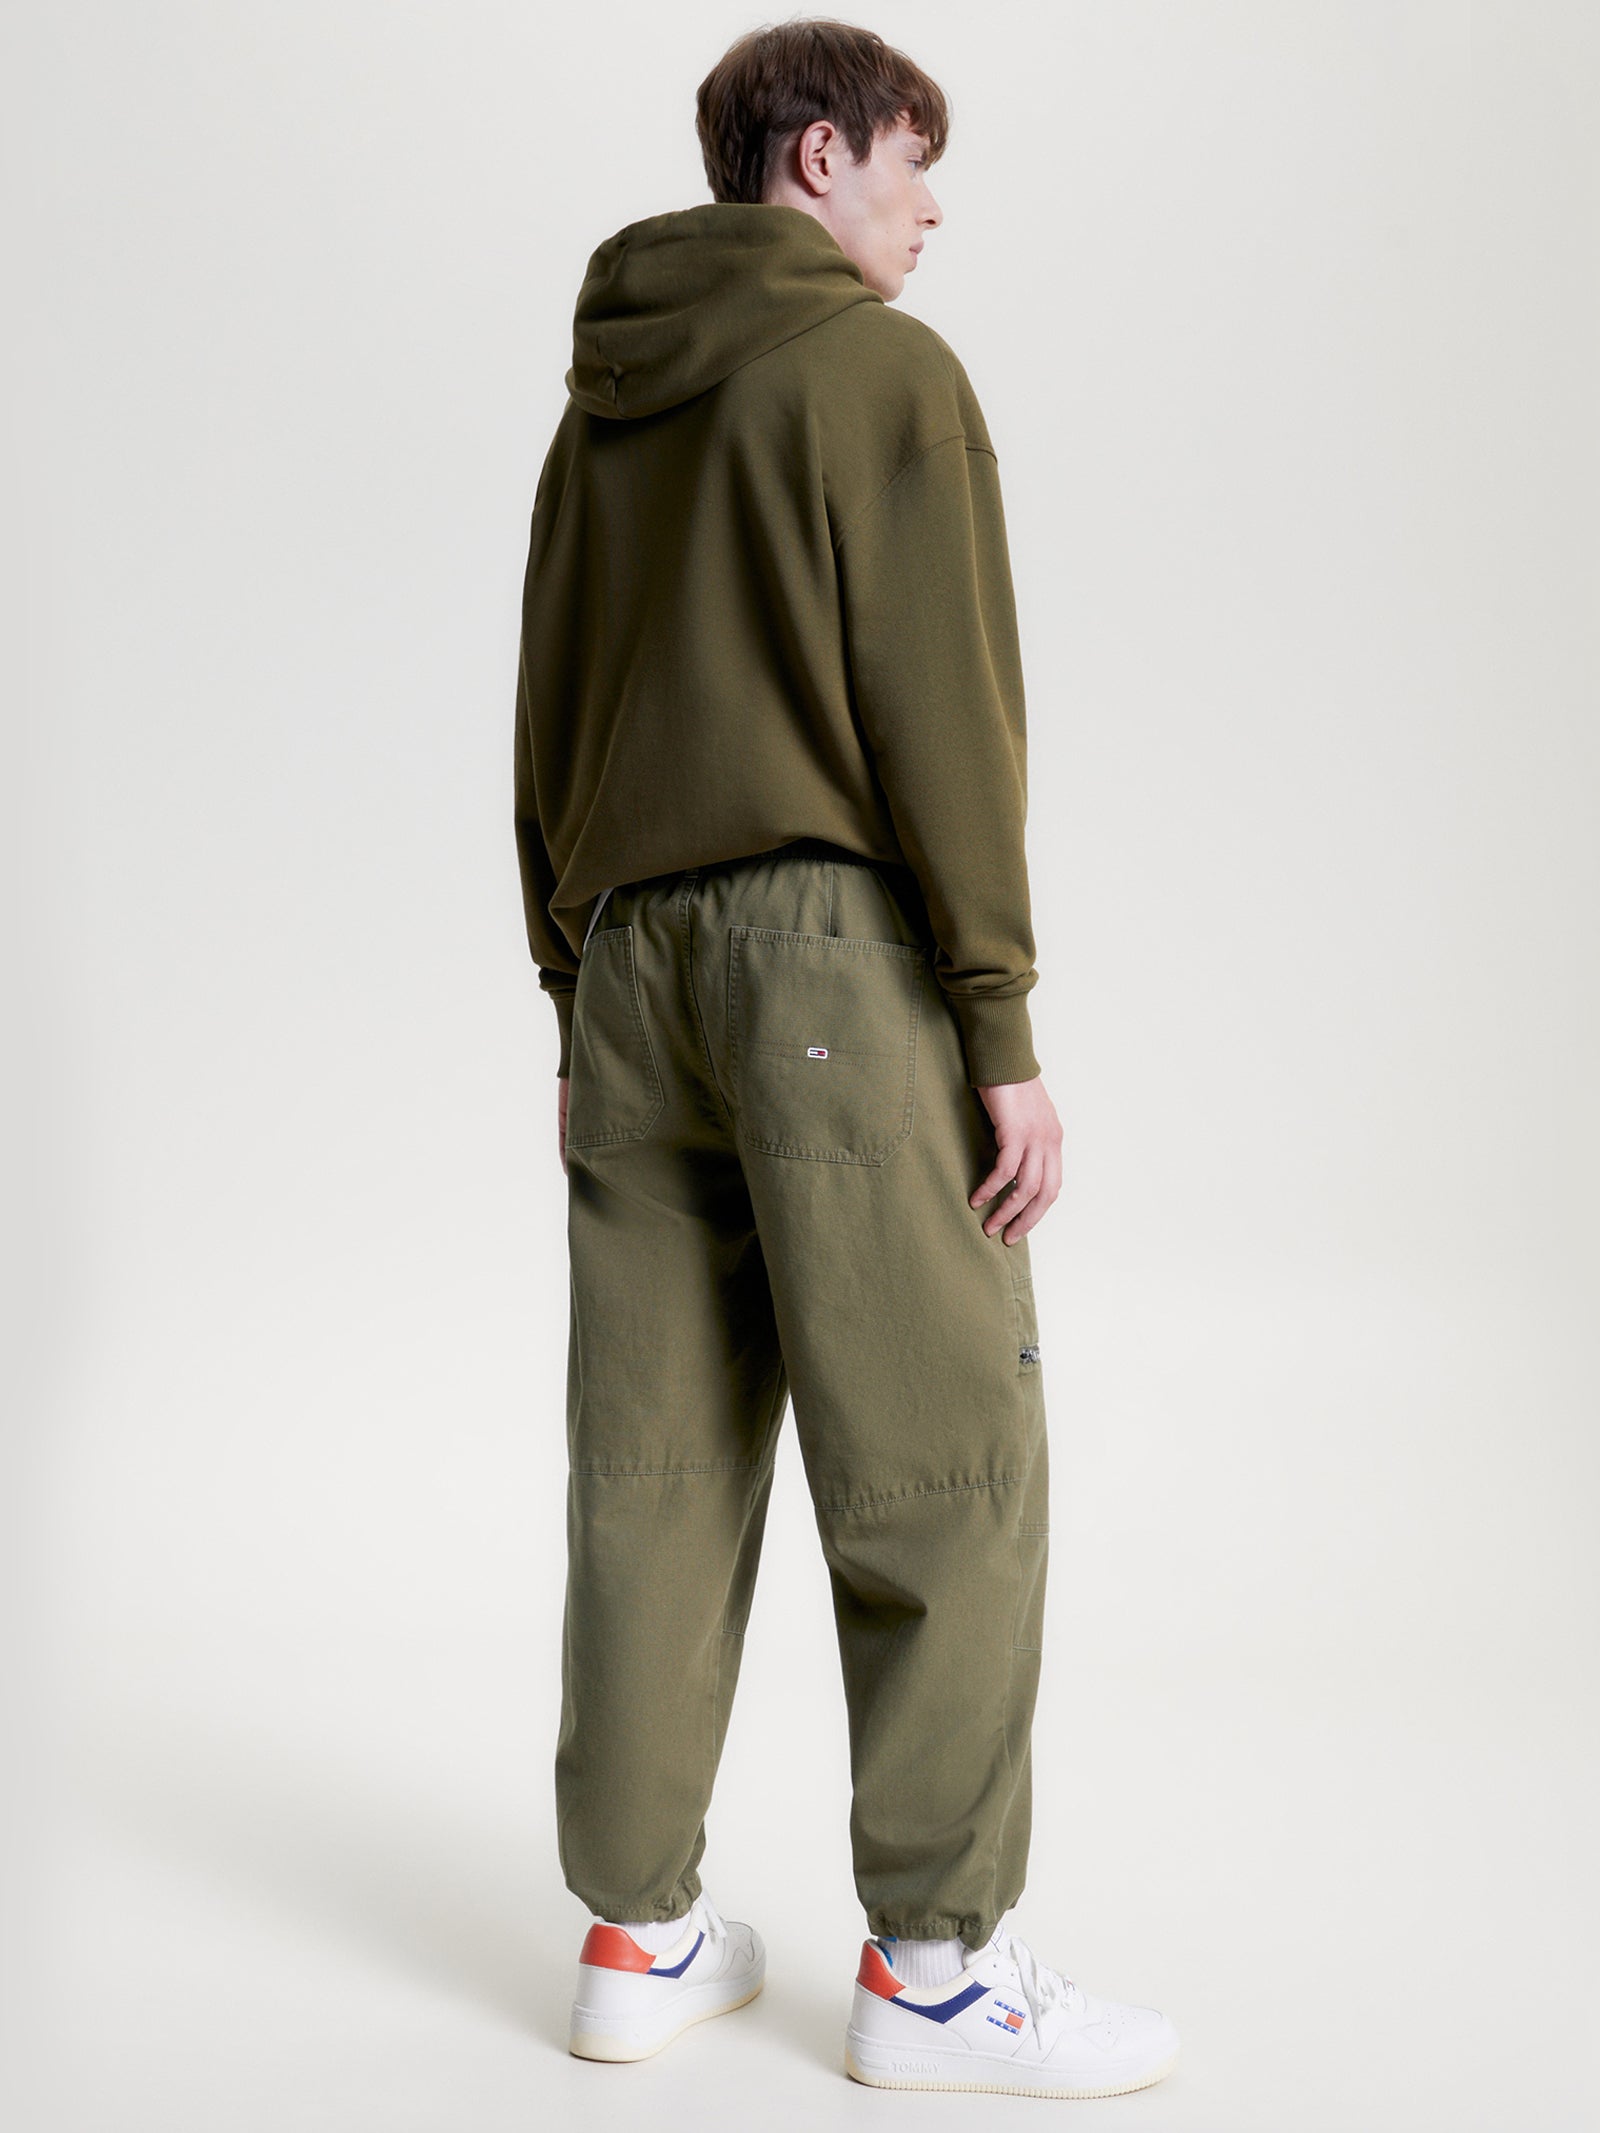 Aiden Baggy Fit Tapered Pants